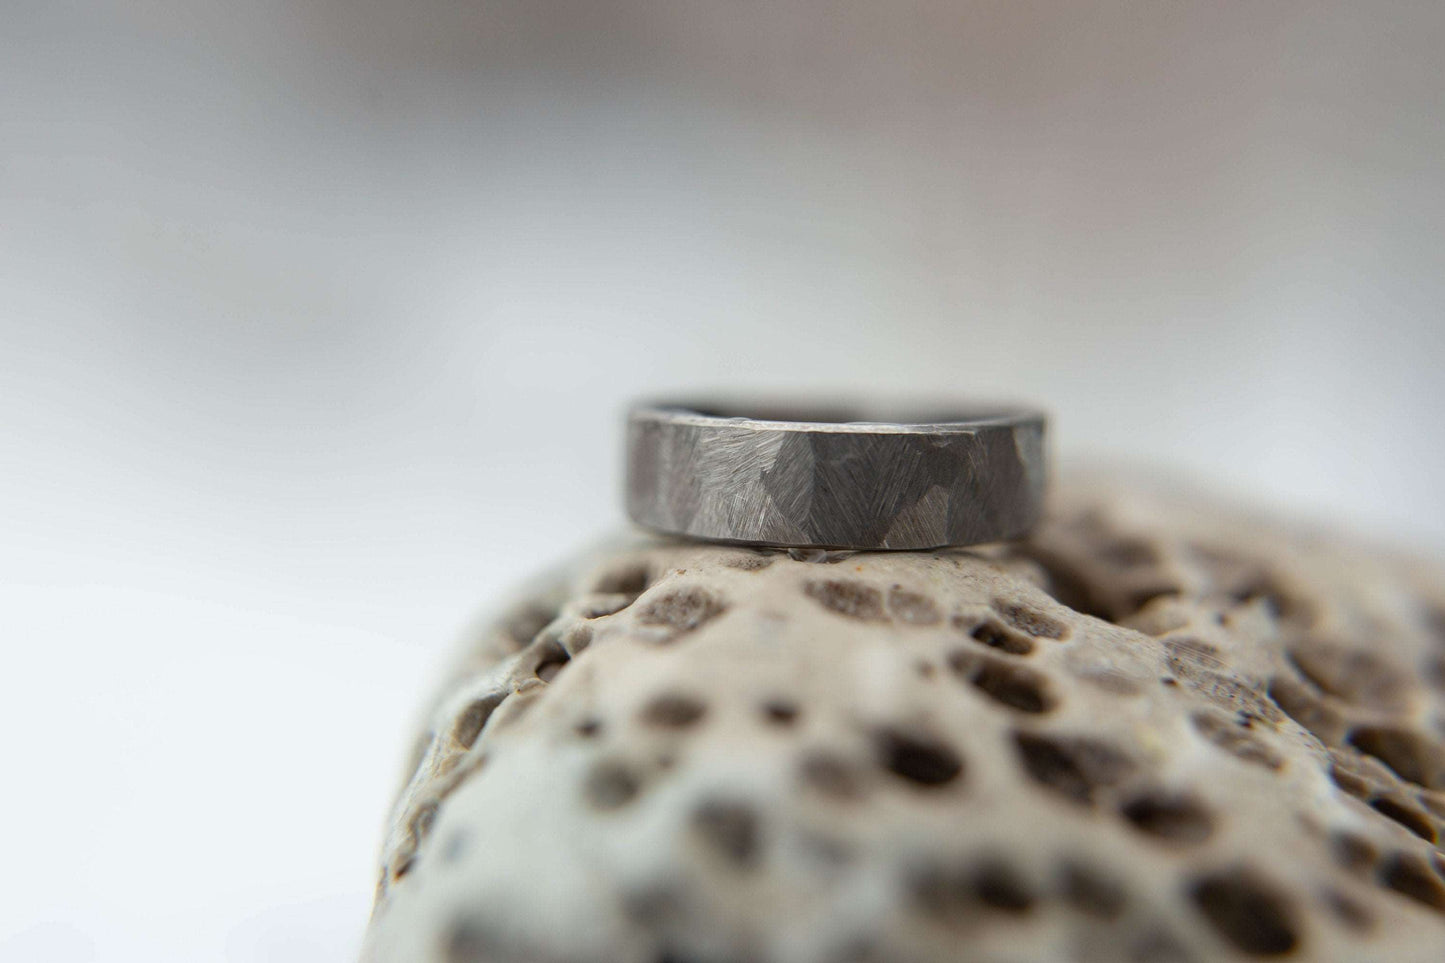 Distressed titanium wedding band. This photo shows a gritty faceted gray titanium ring. (Horizontal on rock)